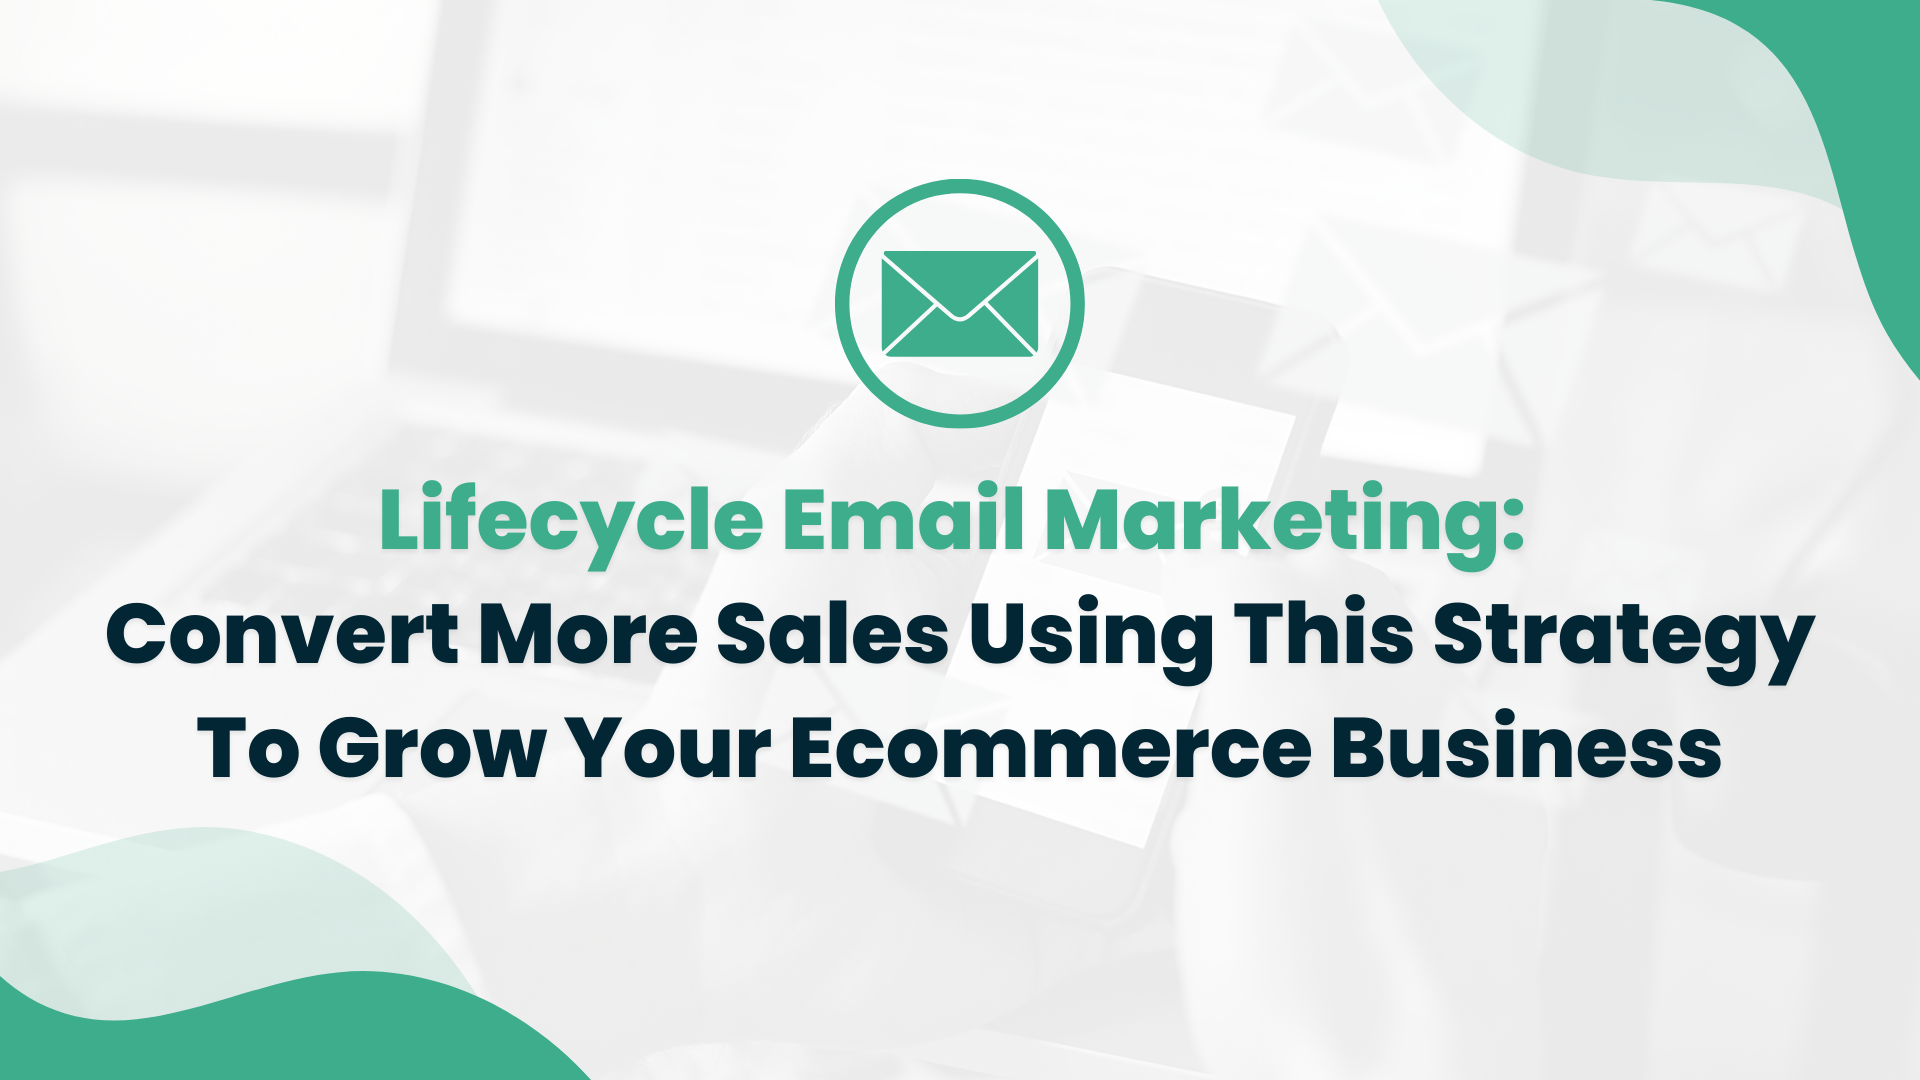 Lifecycle Email Marketing: Convert More Sales Using This Strategy To Grow Your Ecommerce Business